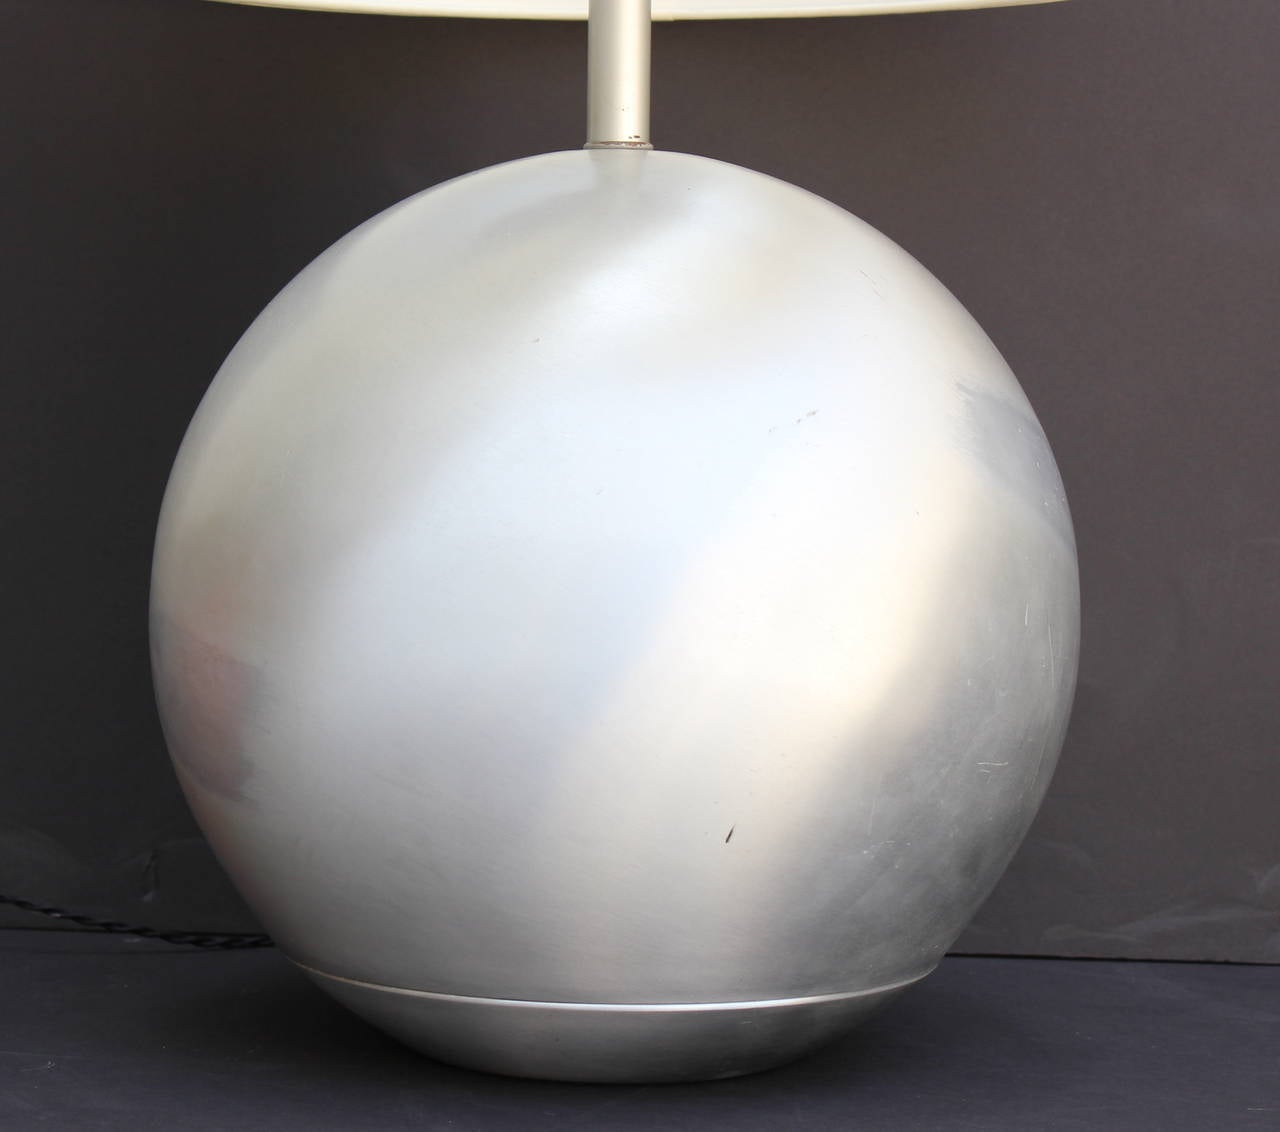 Russel Wright spun aluminum lamp for Raymor, 1950s. Newly rewired. Marked with Raymor Sticker.